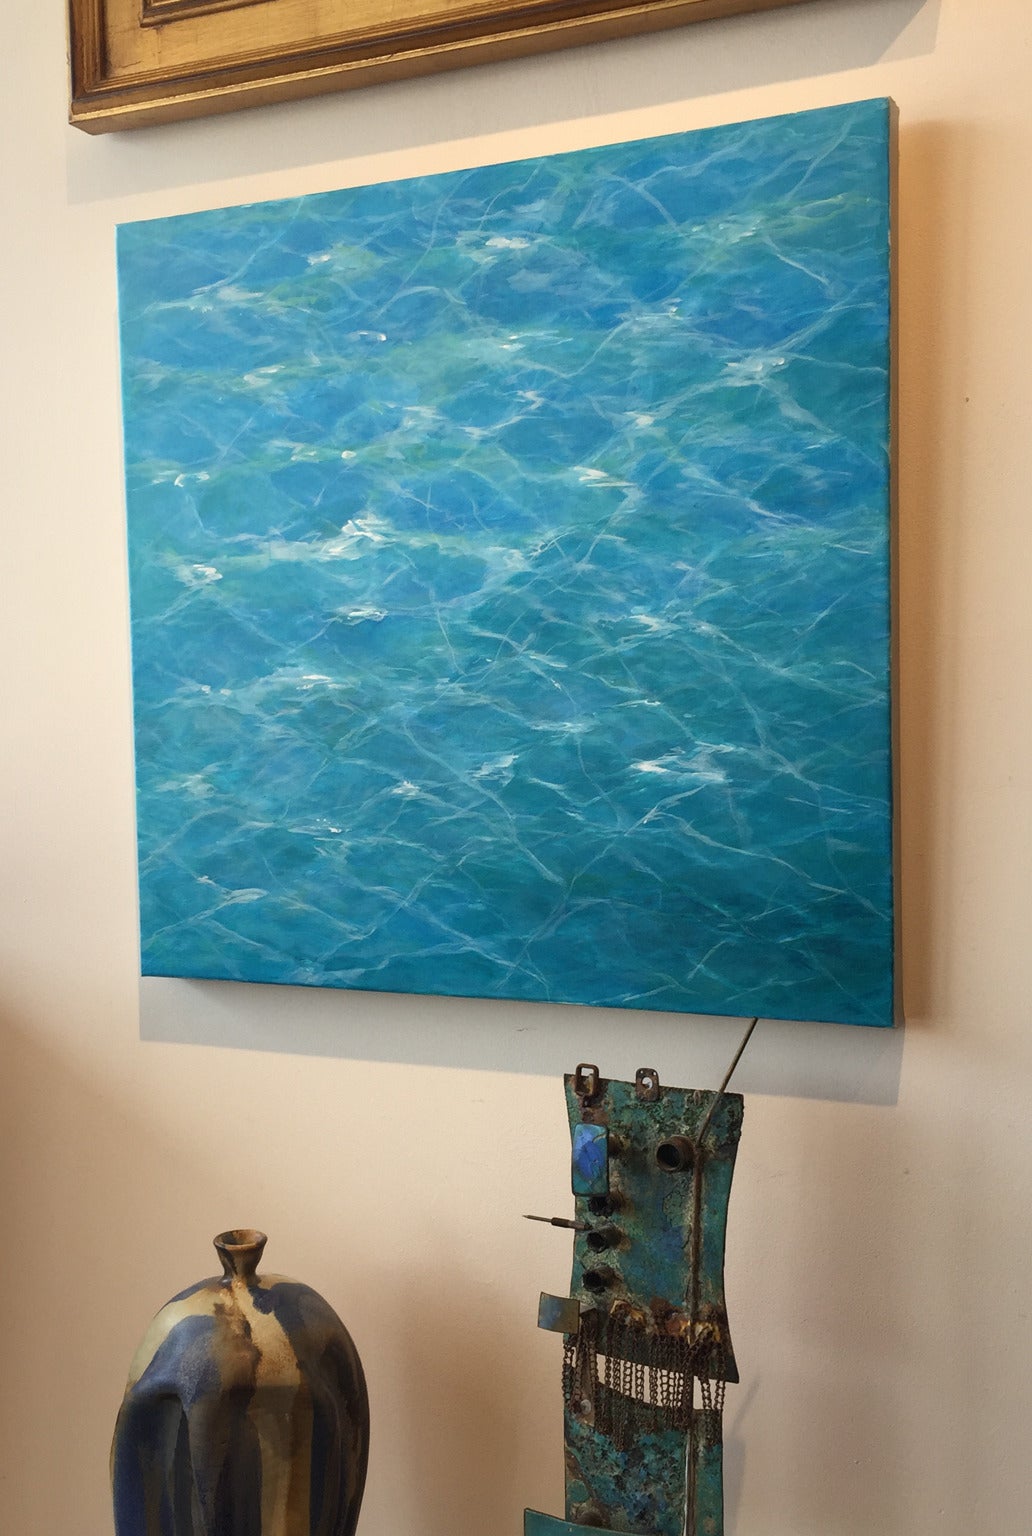 This calming half abstract half realistic painting is the artist's take on blue colors playing in an evening pool. In person, the painting is so vivid you almost feel/see water movement. 

Megan Ruch was born and raised in Albany, NY. She